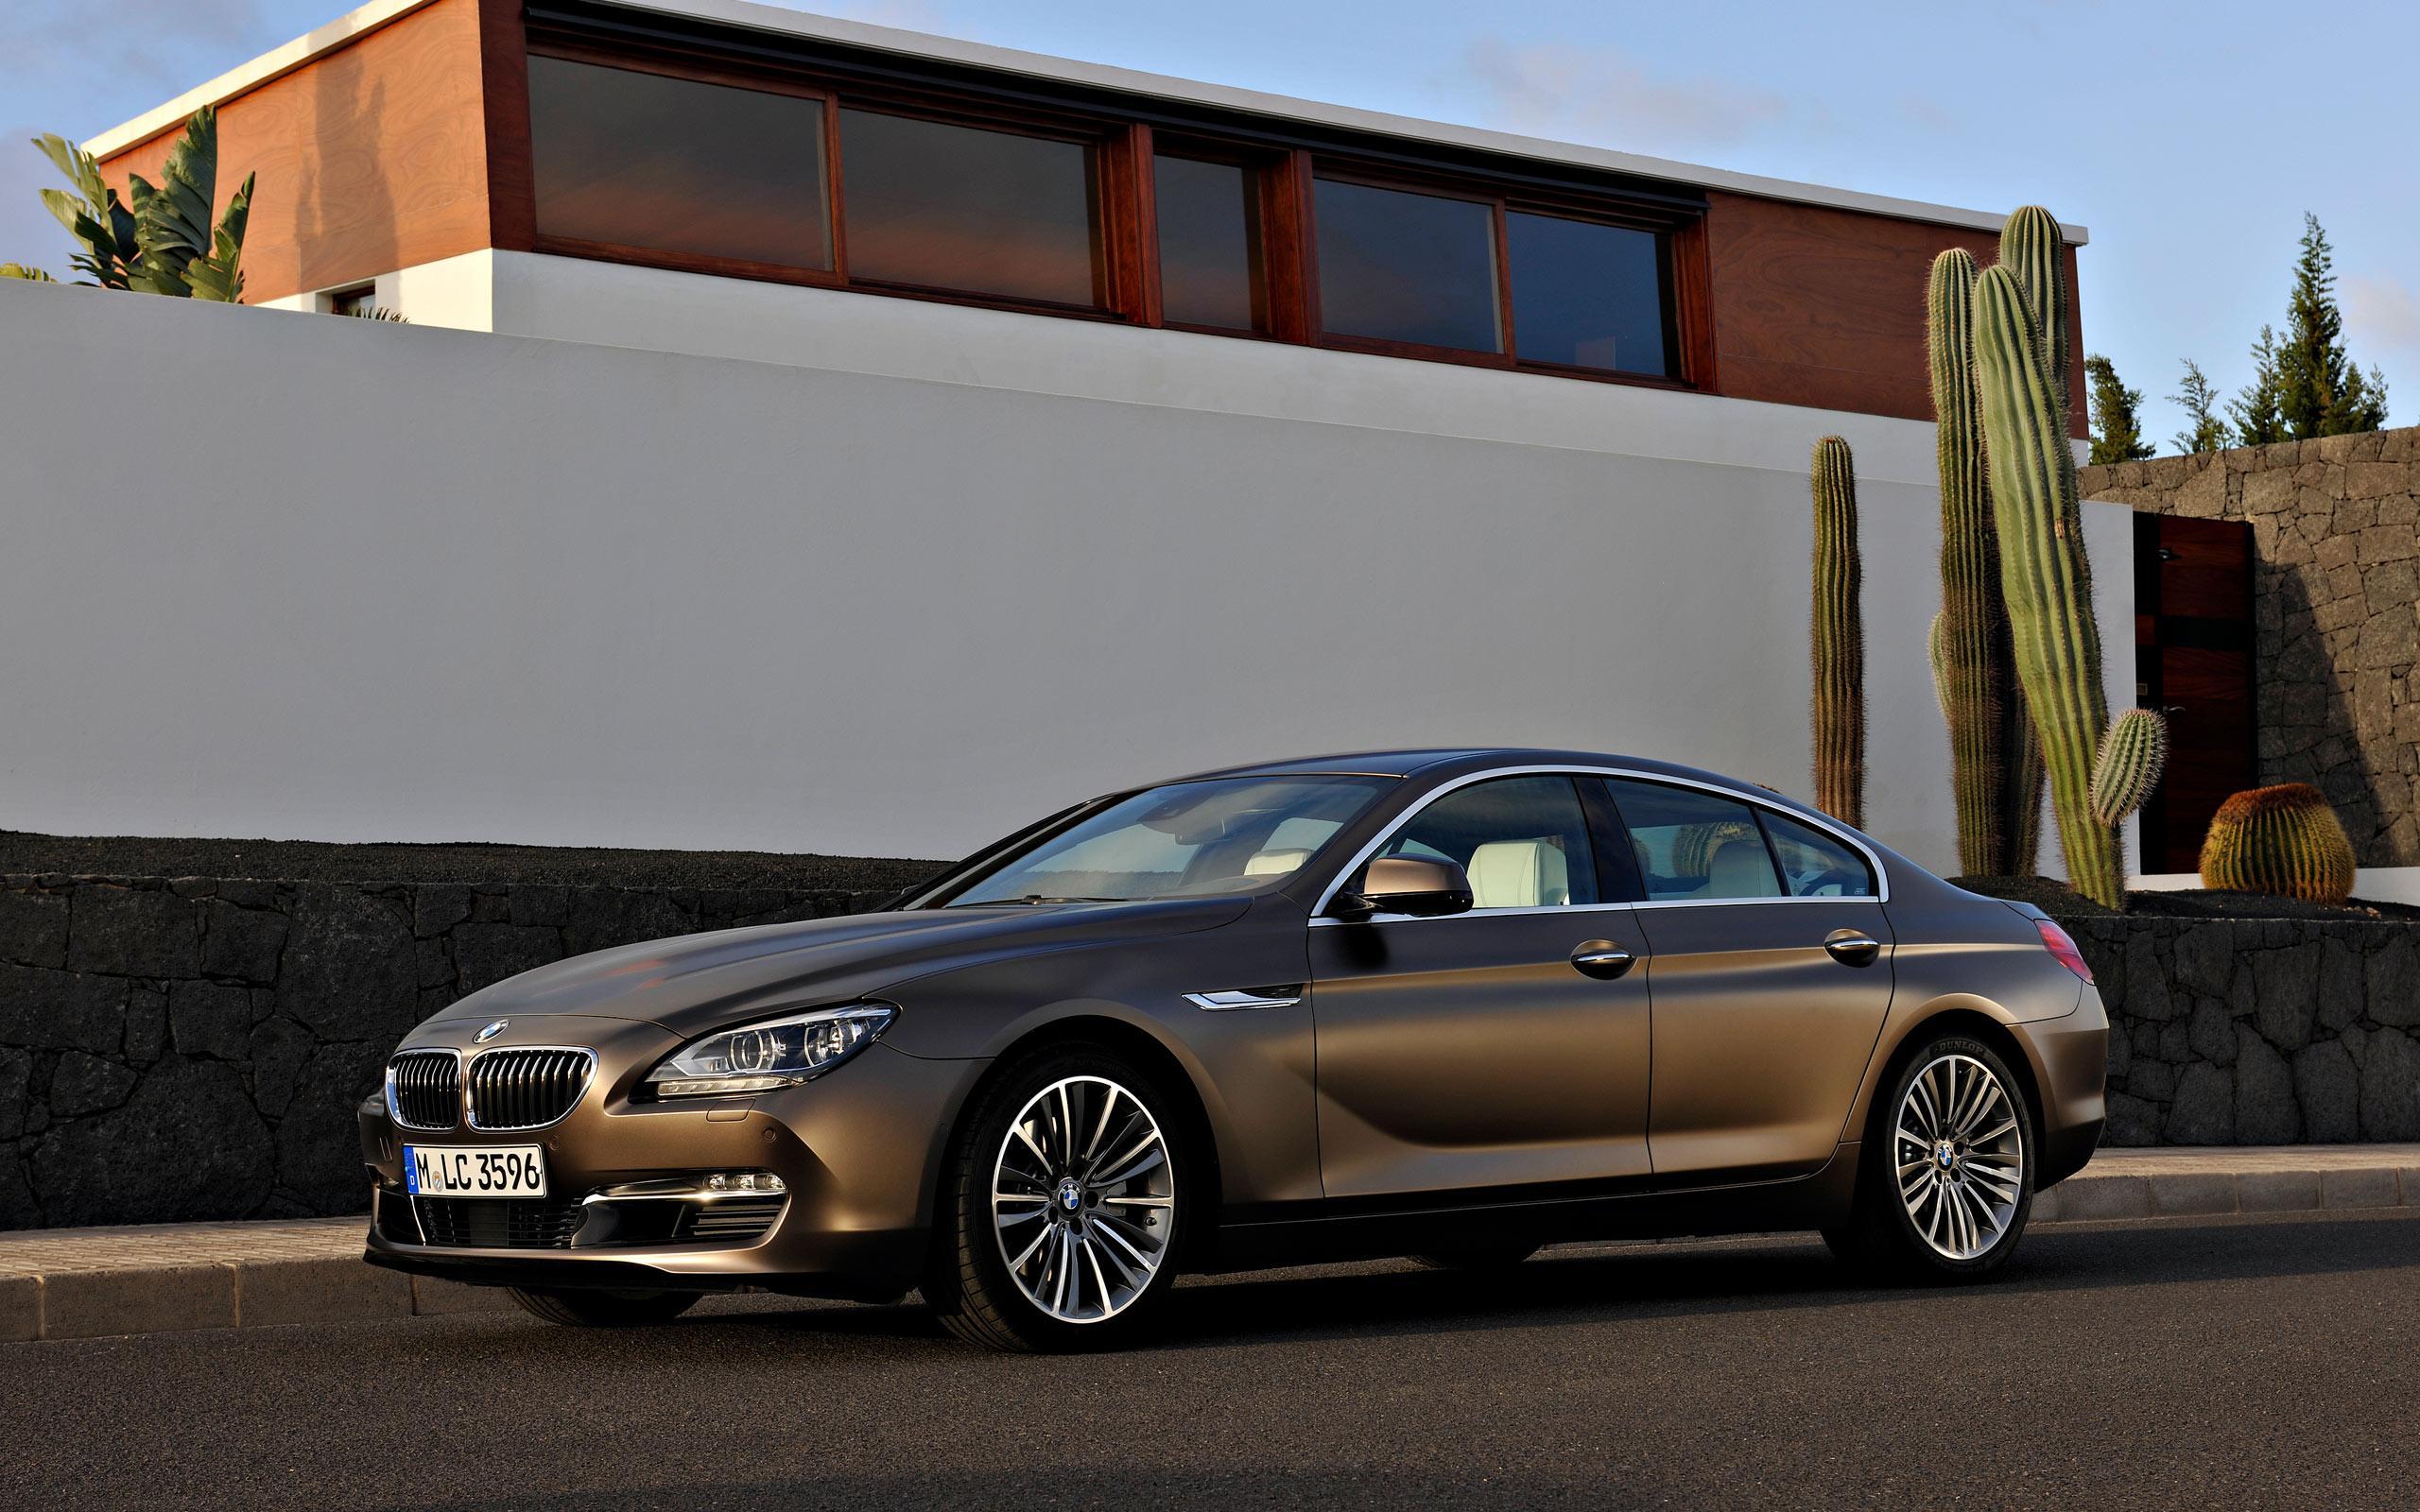 BMW 6 Series Gran Coupe On Road Wallpaper